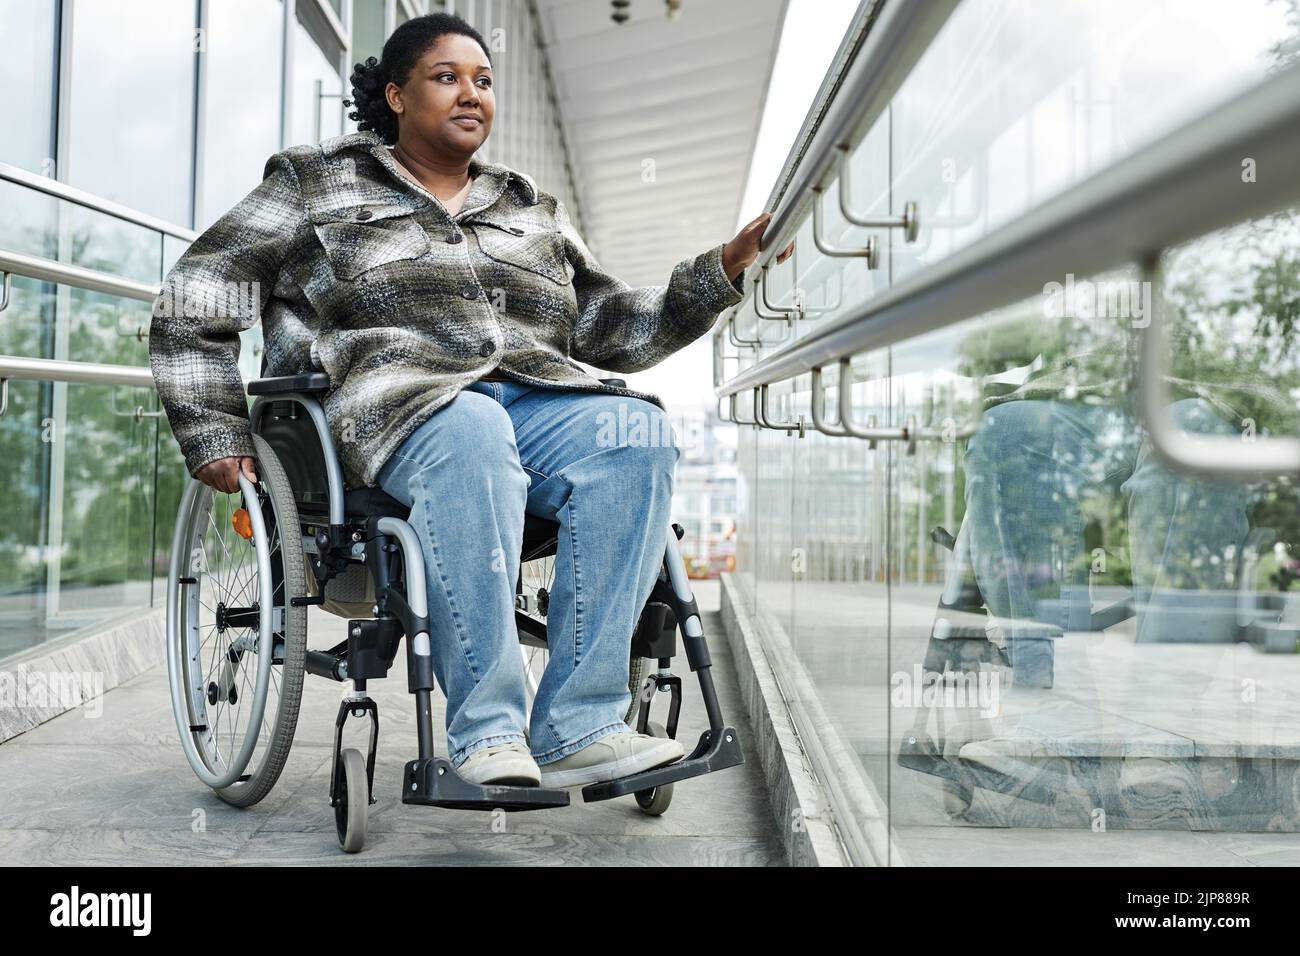 Full length portrait of smiling black woman in wheelchair moving down ramp in city, urban accessibility feature, copy space Stock Photo